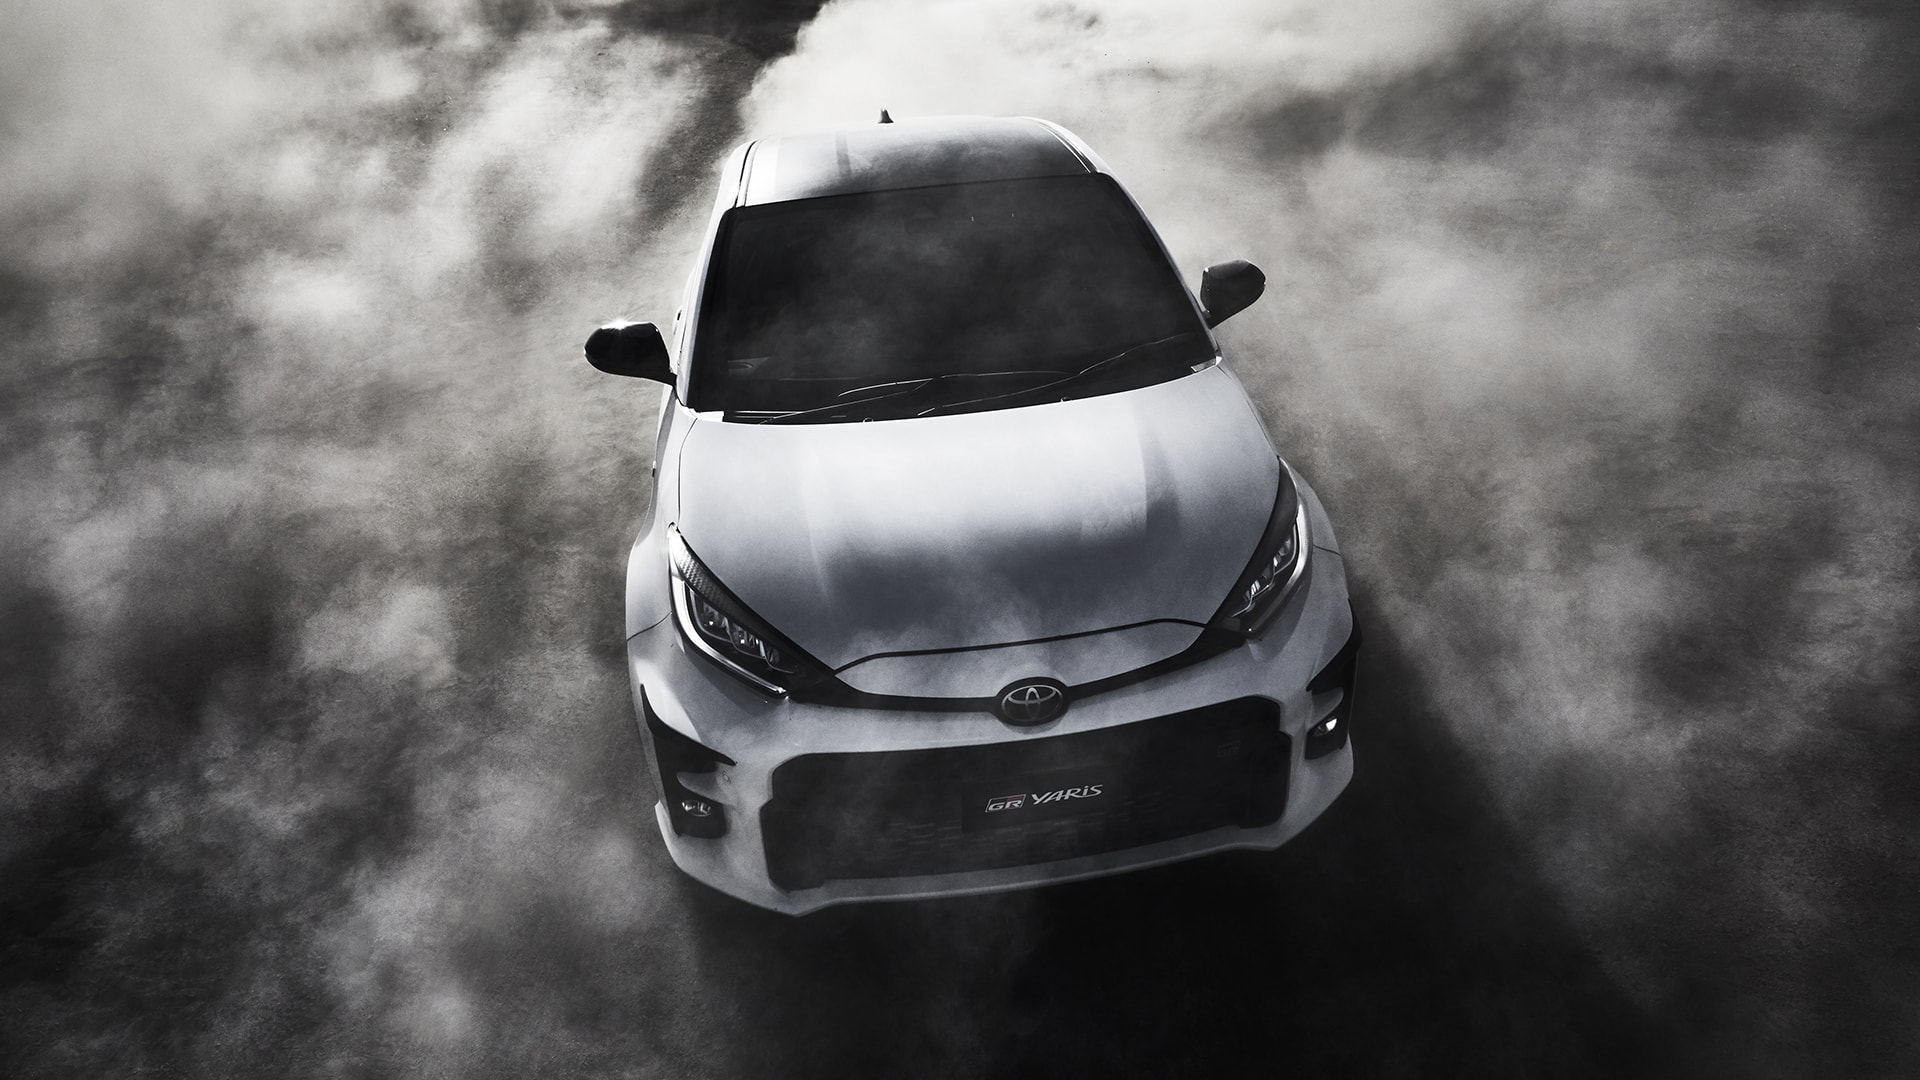 New Toyota GR Yaris: A Rally Car for the Road